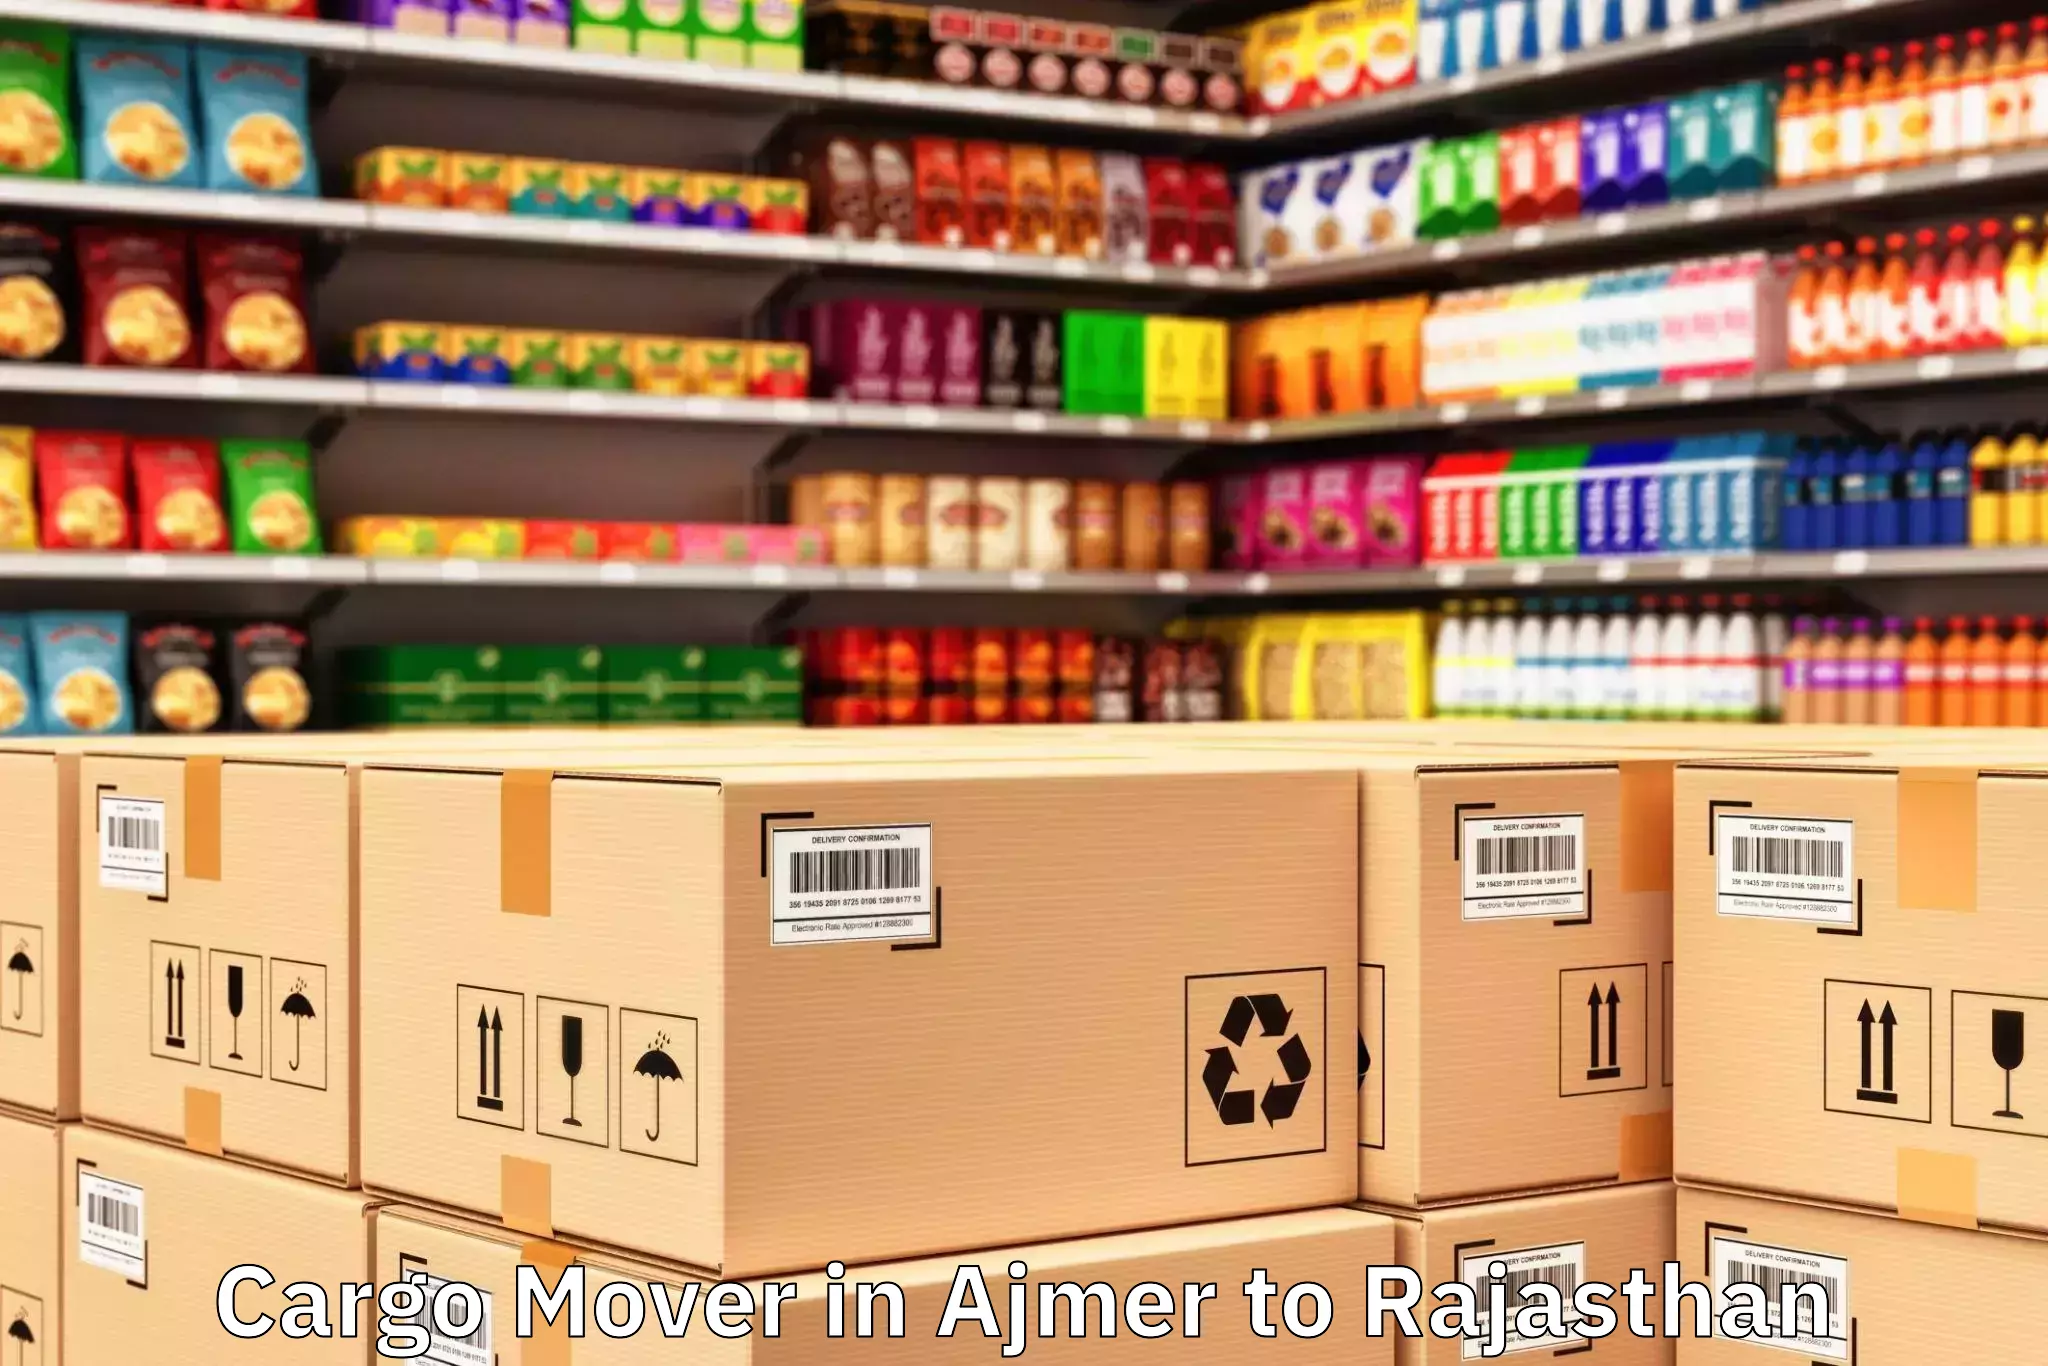 Efficient Ajmer to Rajasthan Cargo Mover